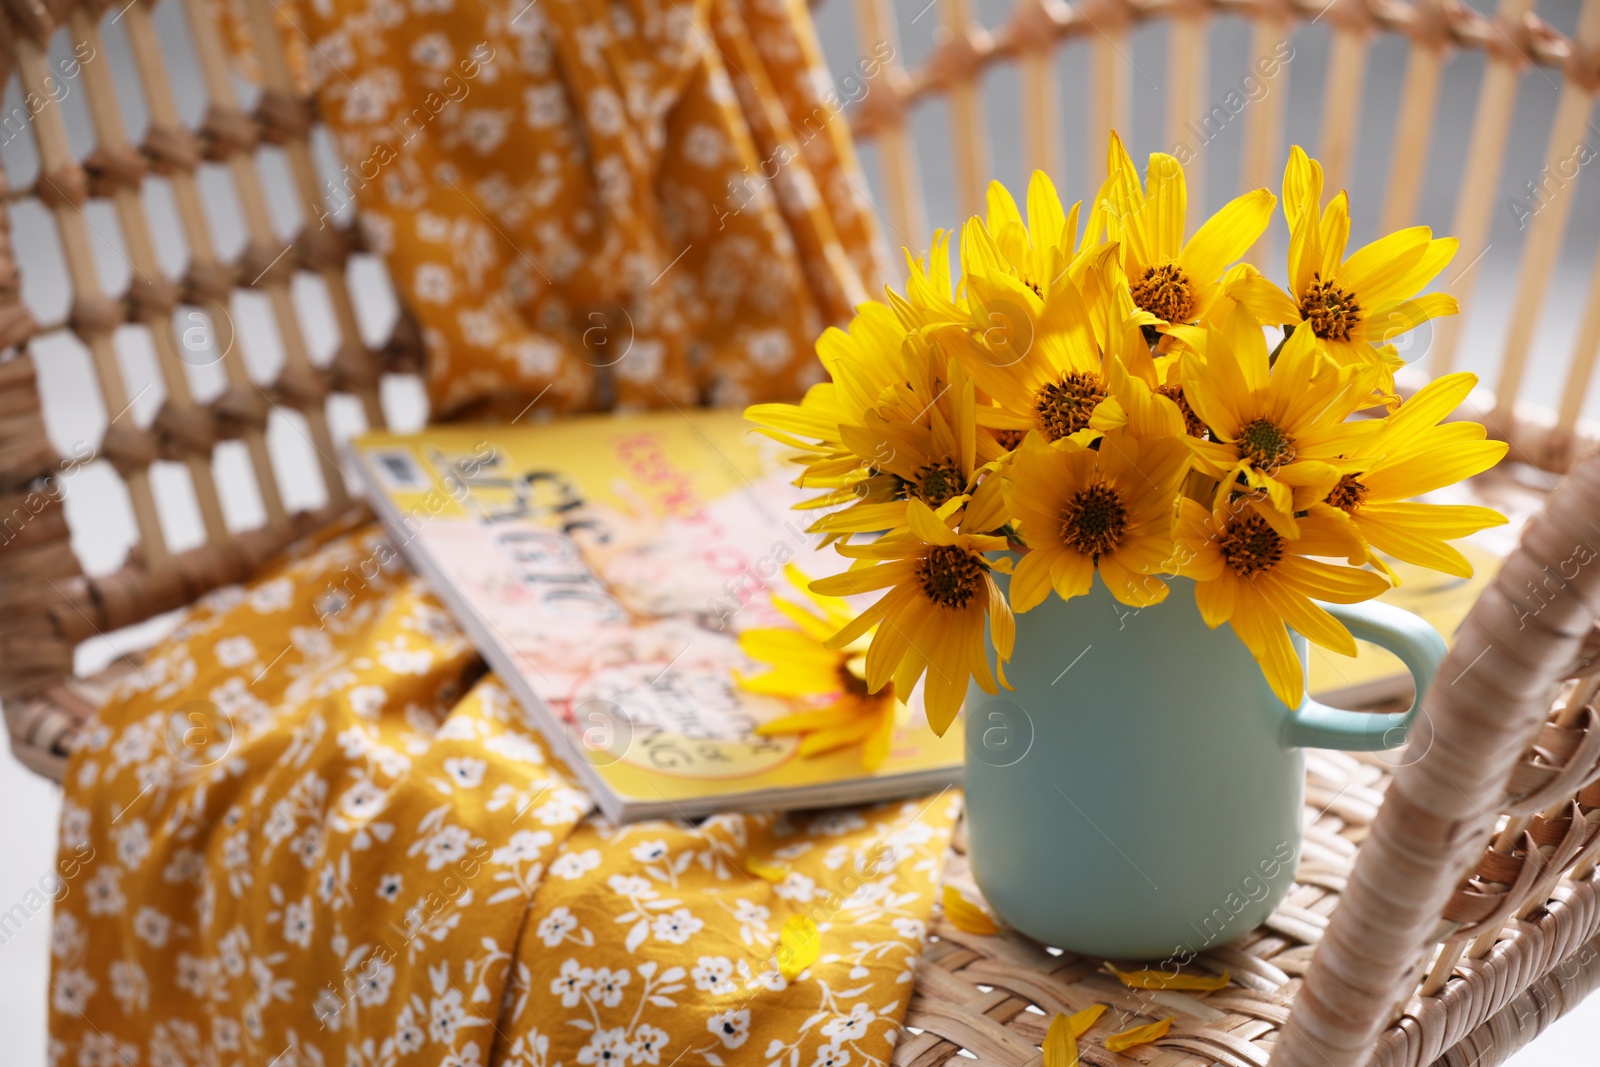 Photo of Beautiful bright flowers in light blue cup near magazine and fabric on rattan armchair. Space for text